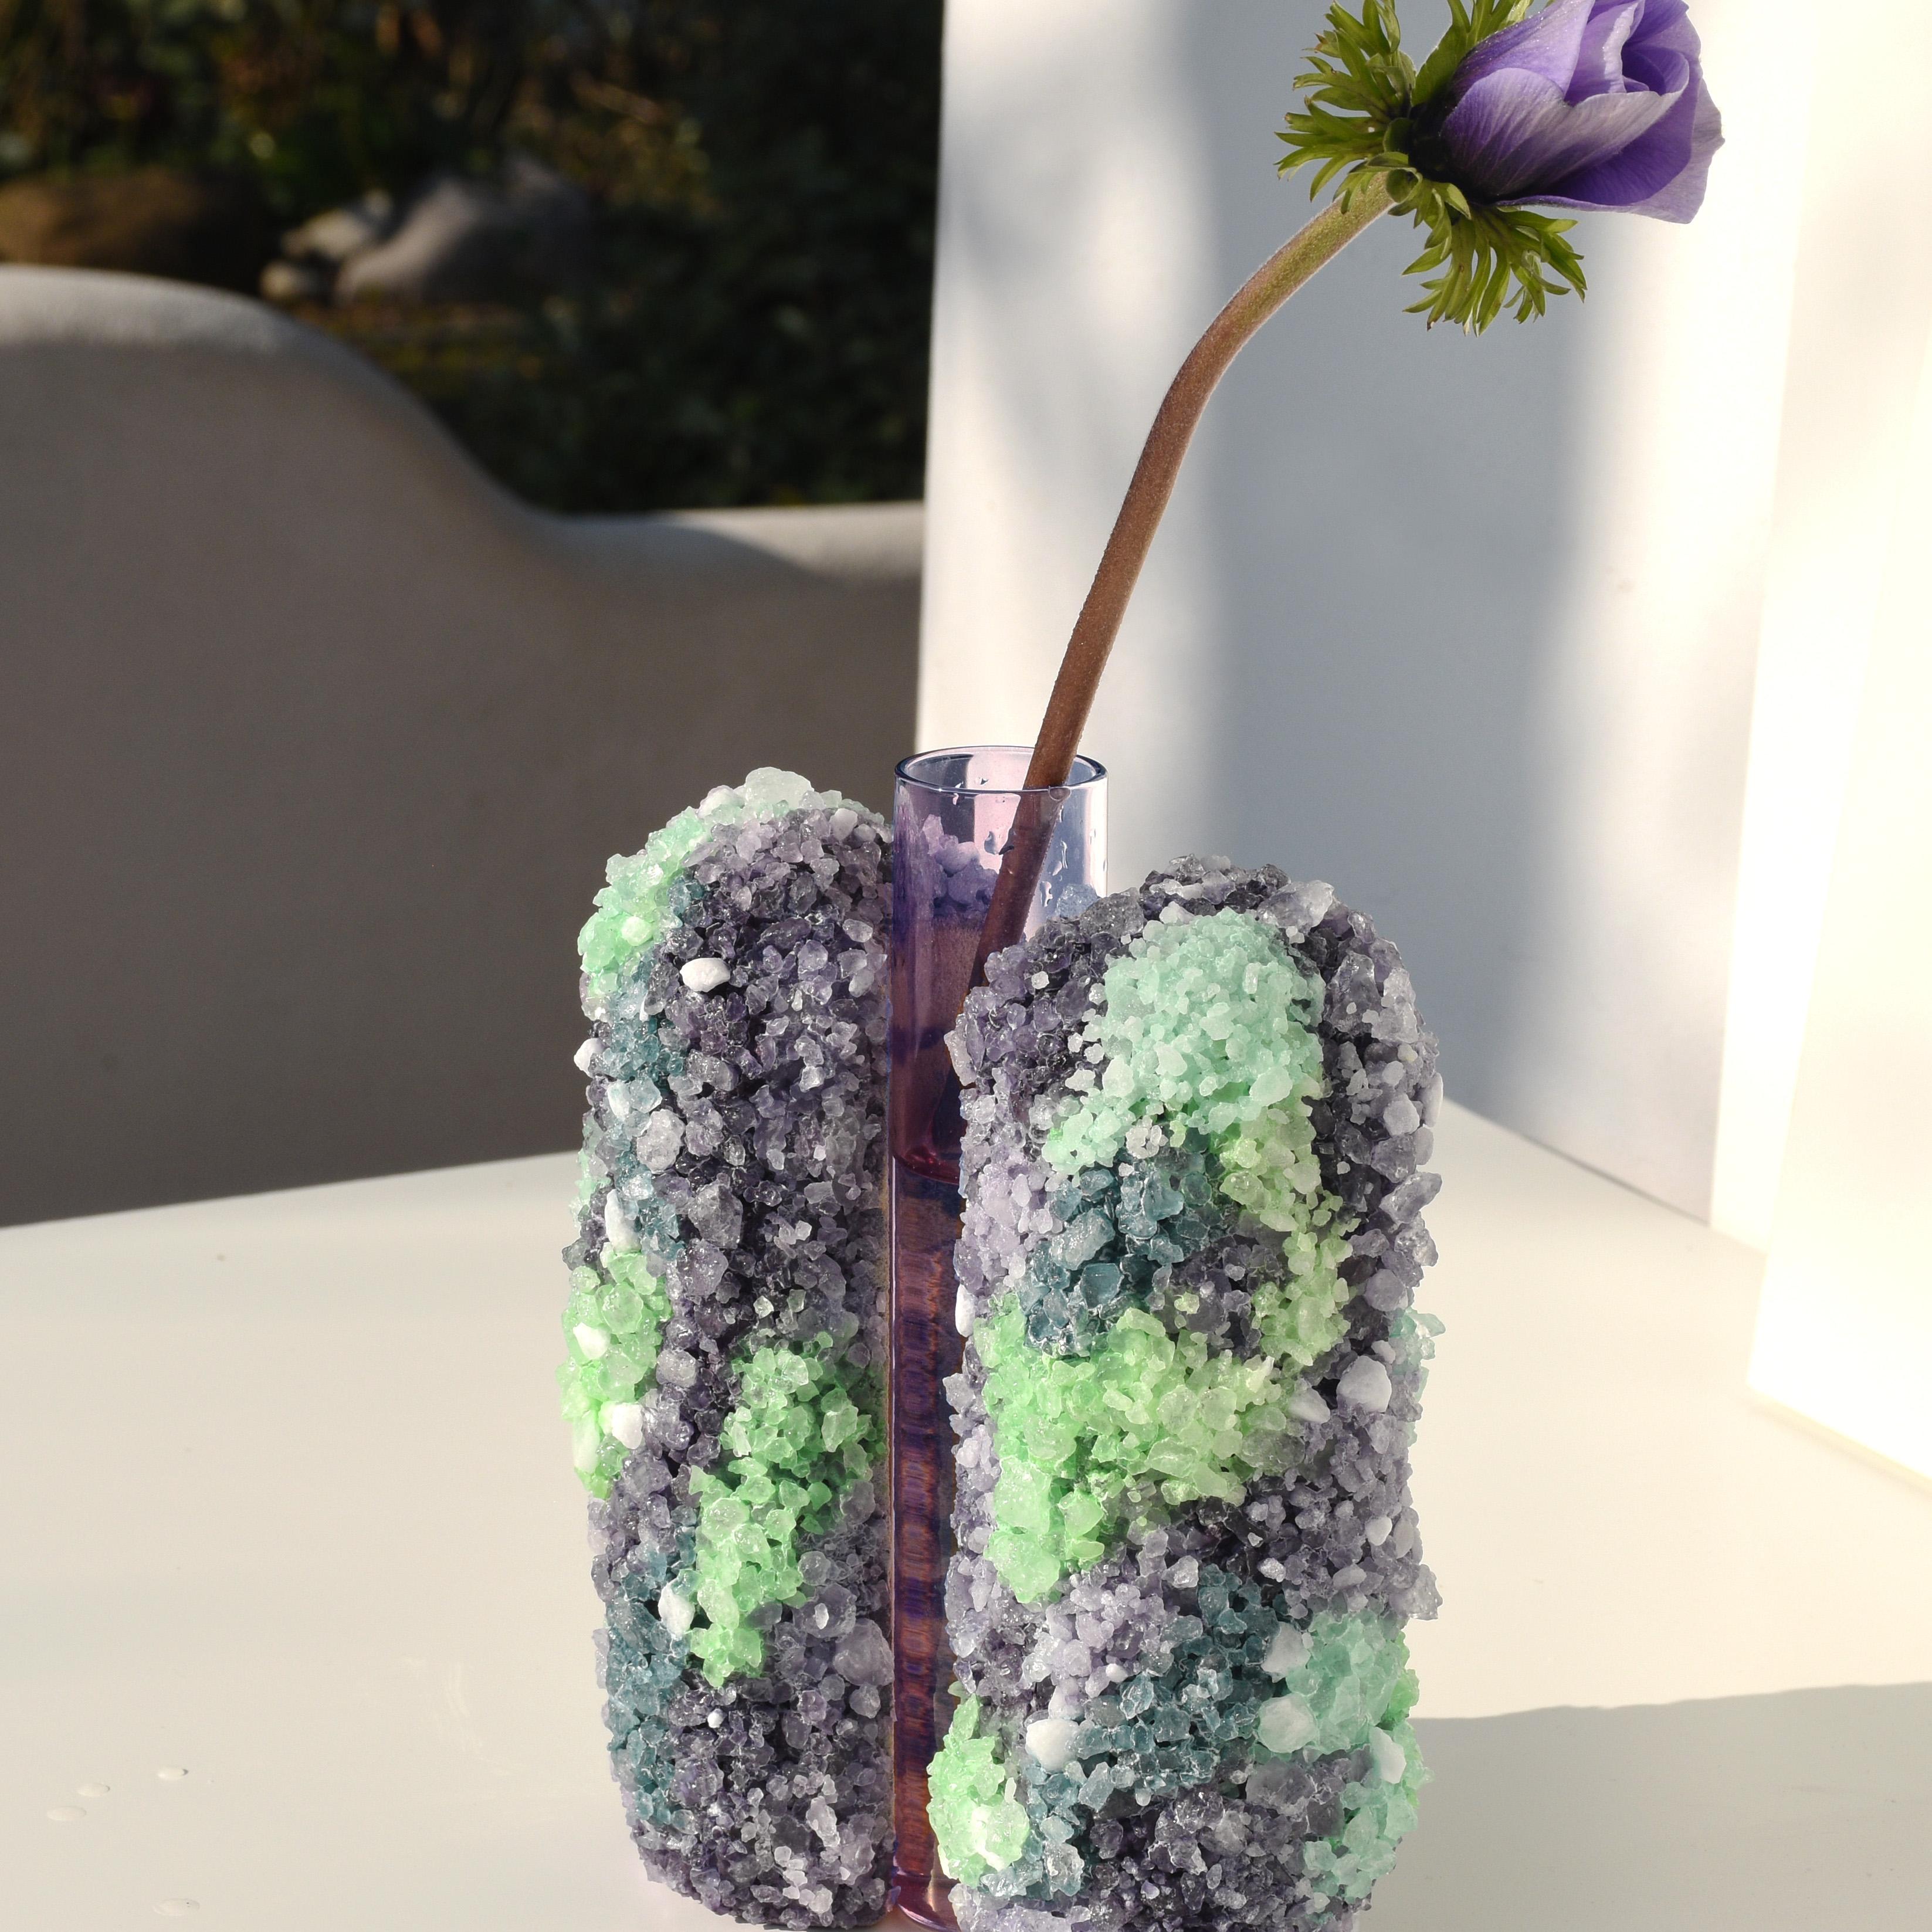 Italian Violet & Green Handcrafted Stone with Rock Crystals Vase by COKI For Sale